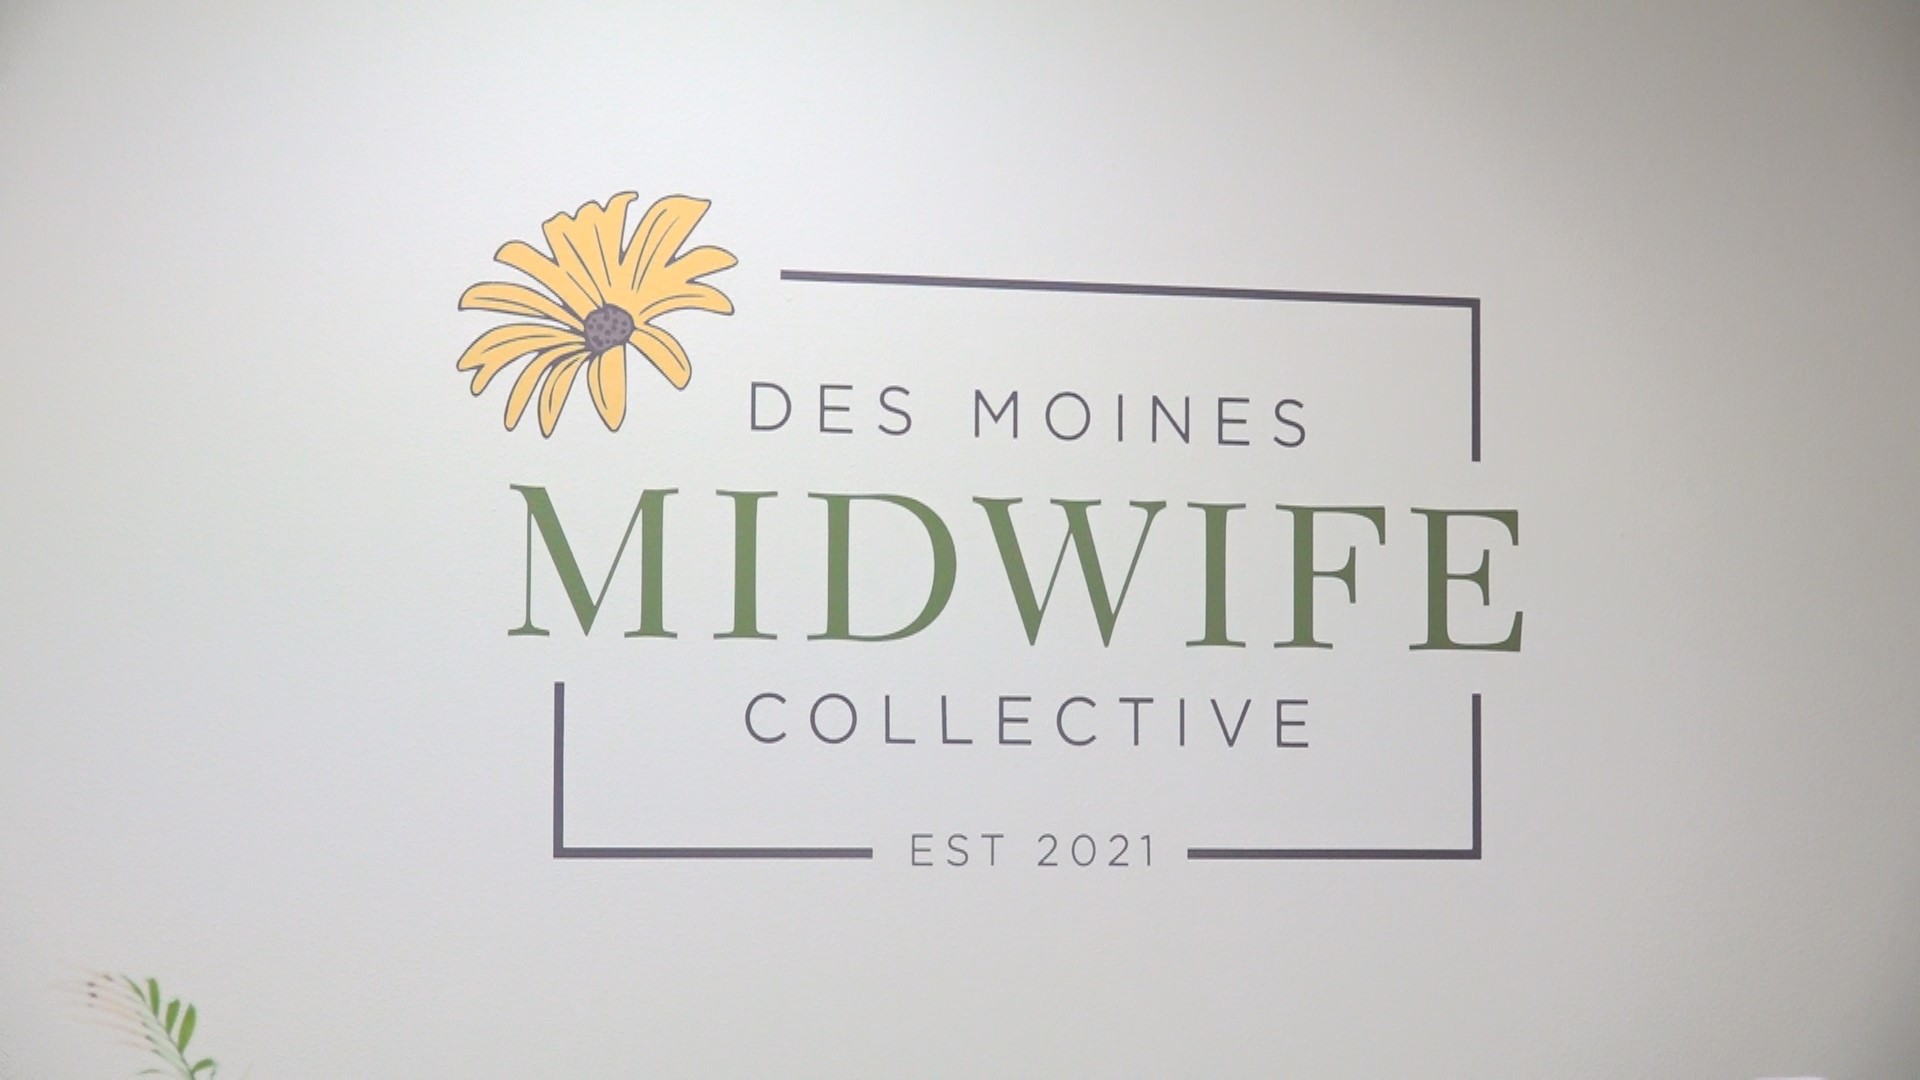 The Des Moines Midwife Collective says mentorship from SCORE has helped their business thrive.